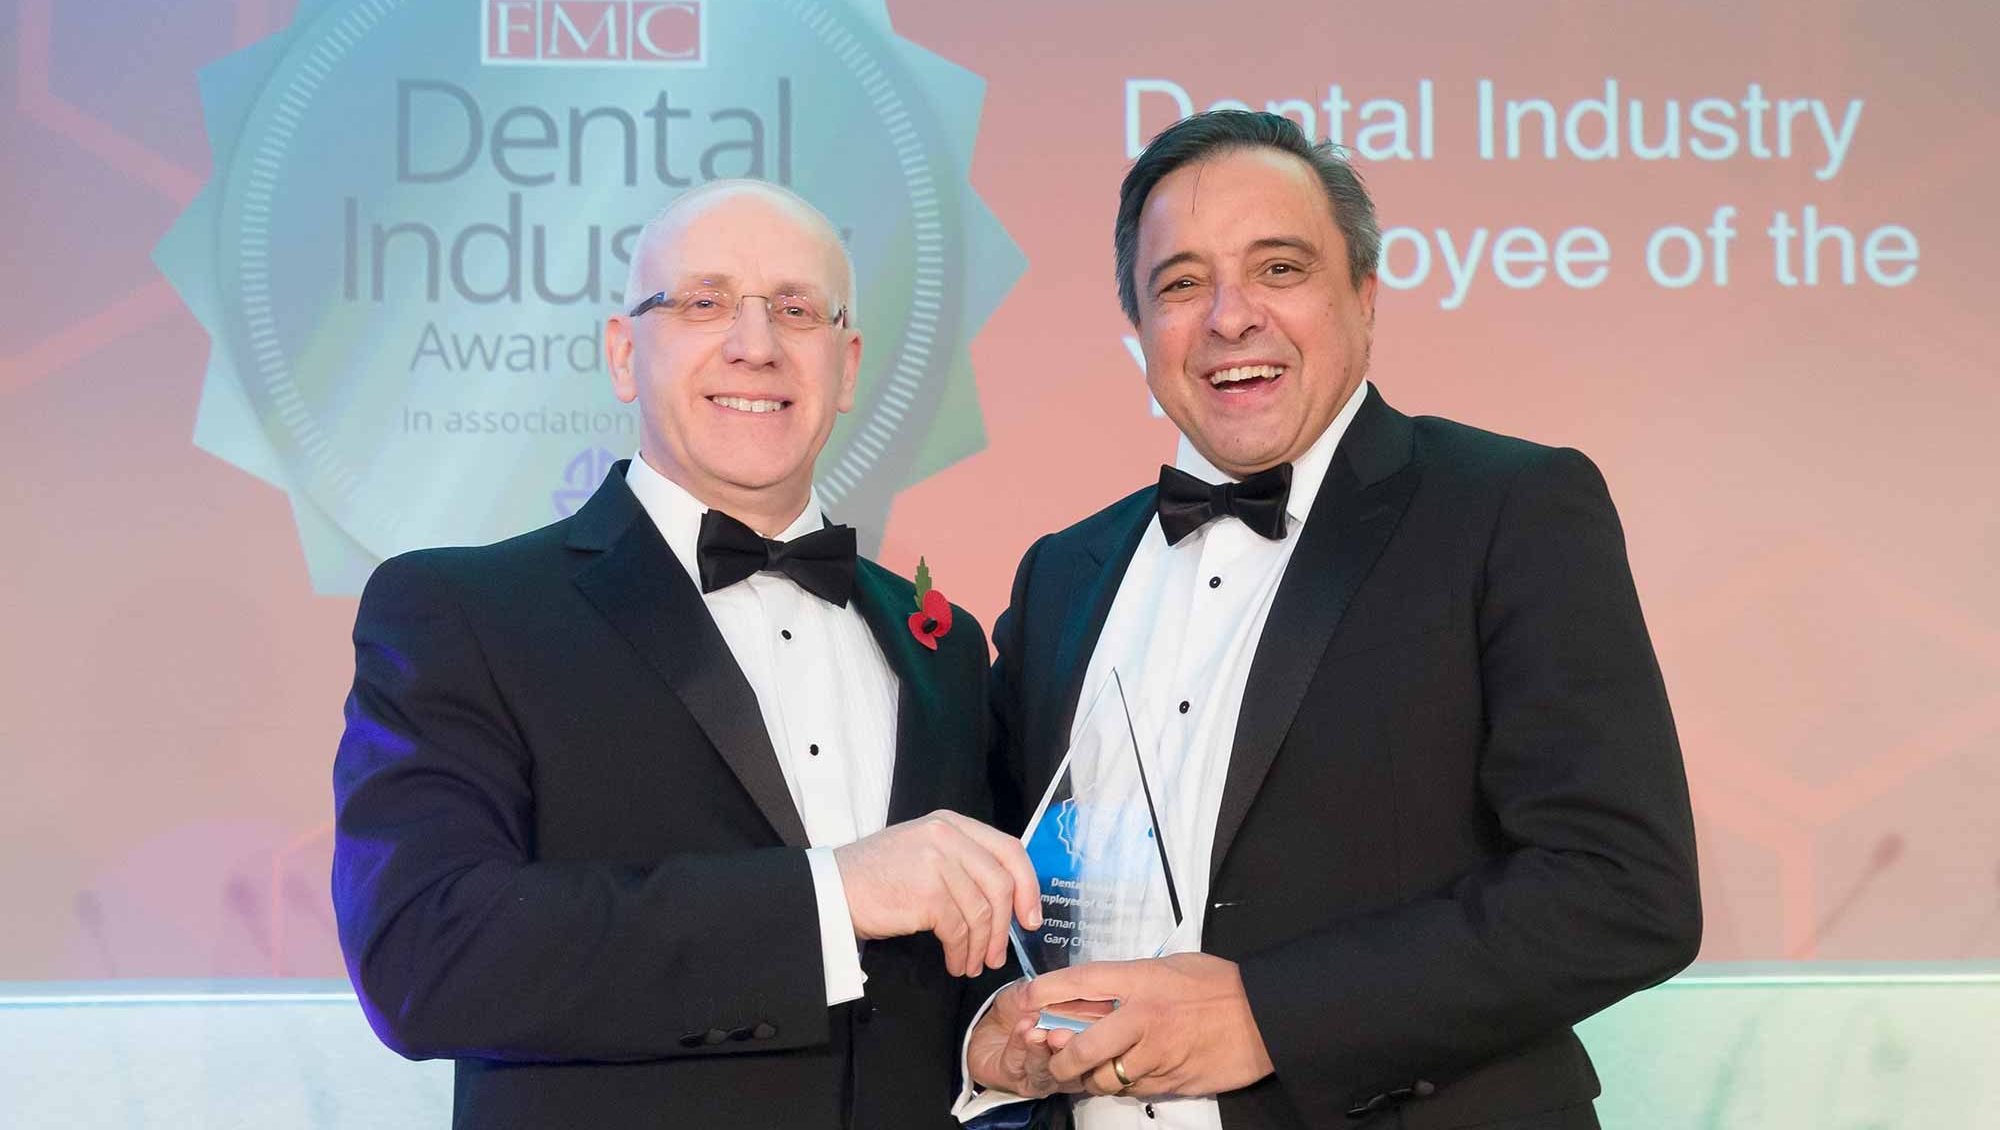 Dental Industry Awards 2019 Employee of the Year